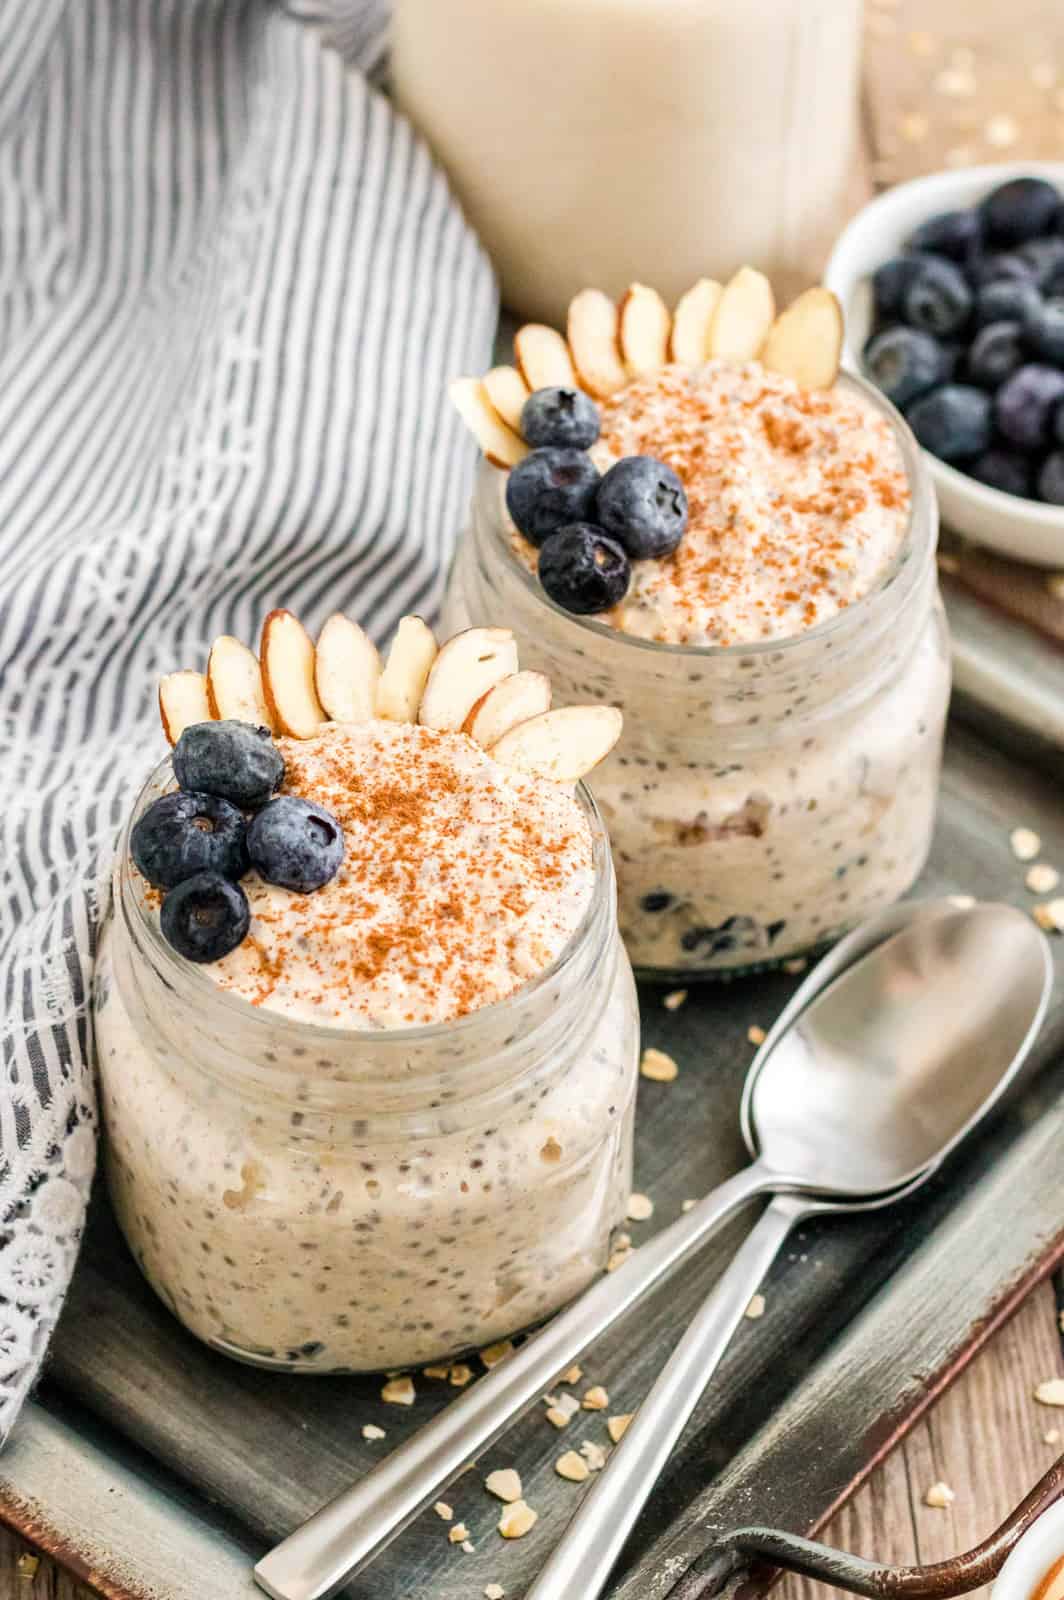 Two jars of Blueberry Overnight Oats garnished on tray.